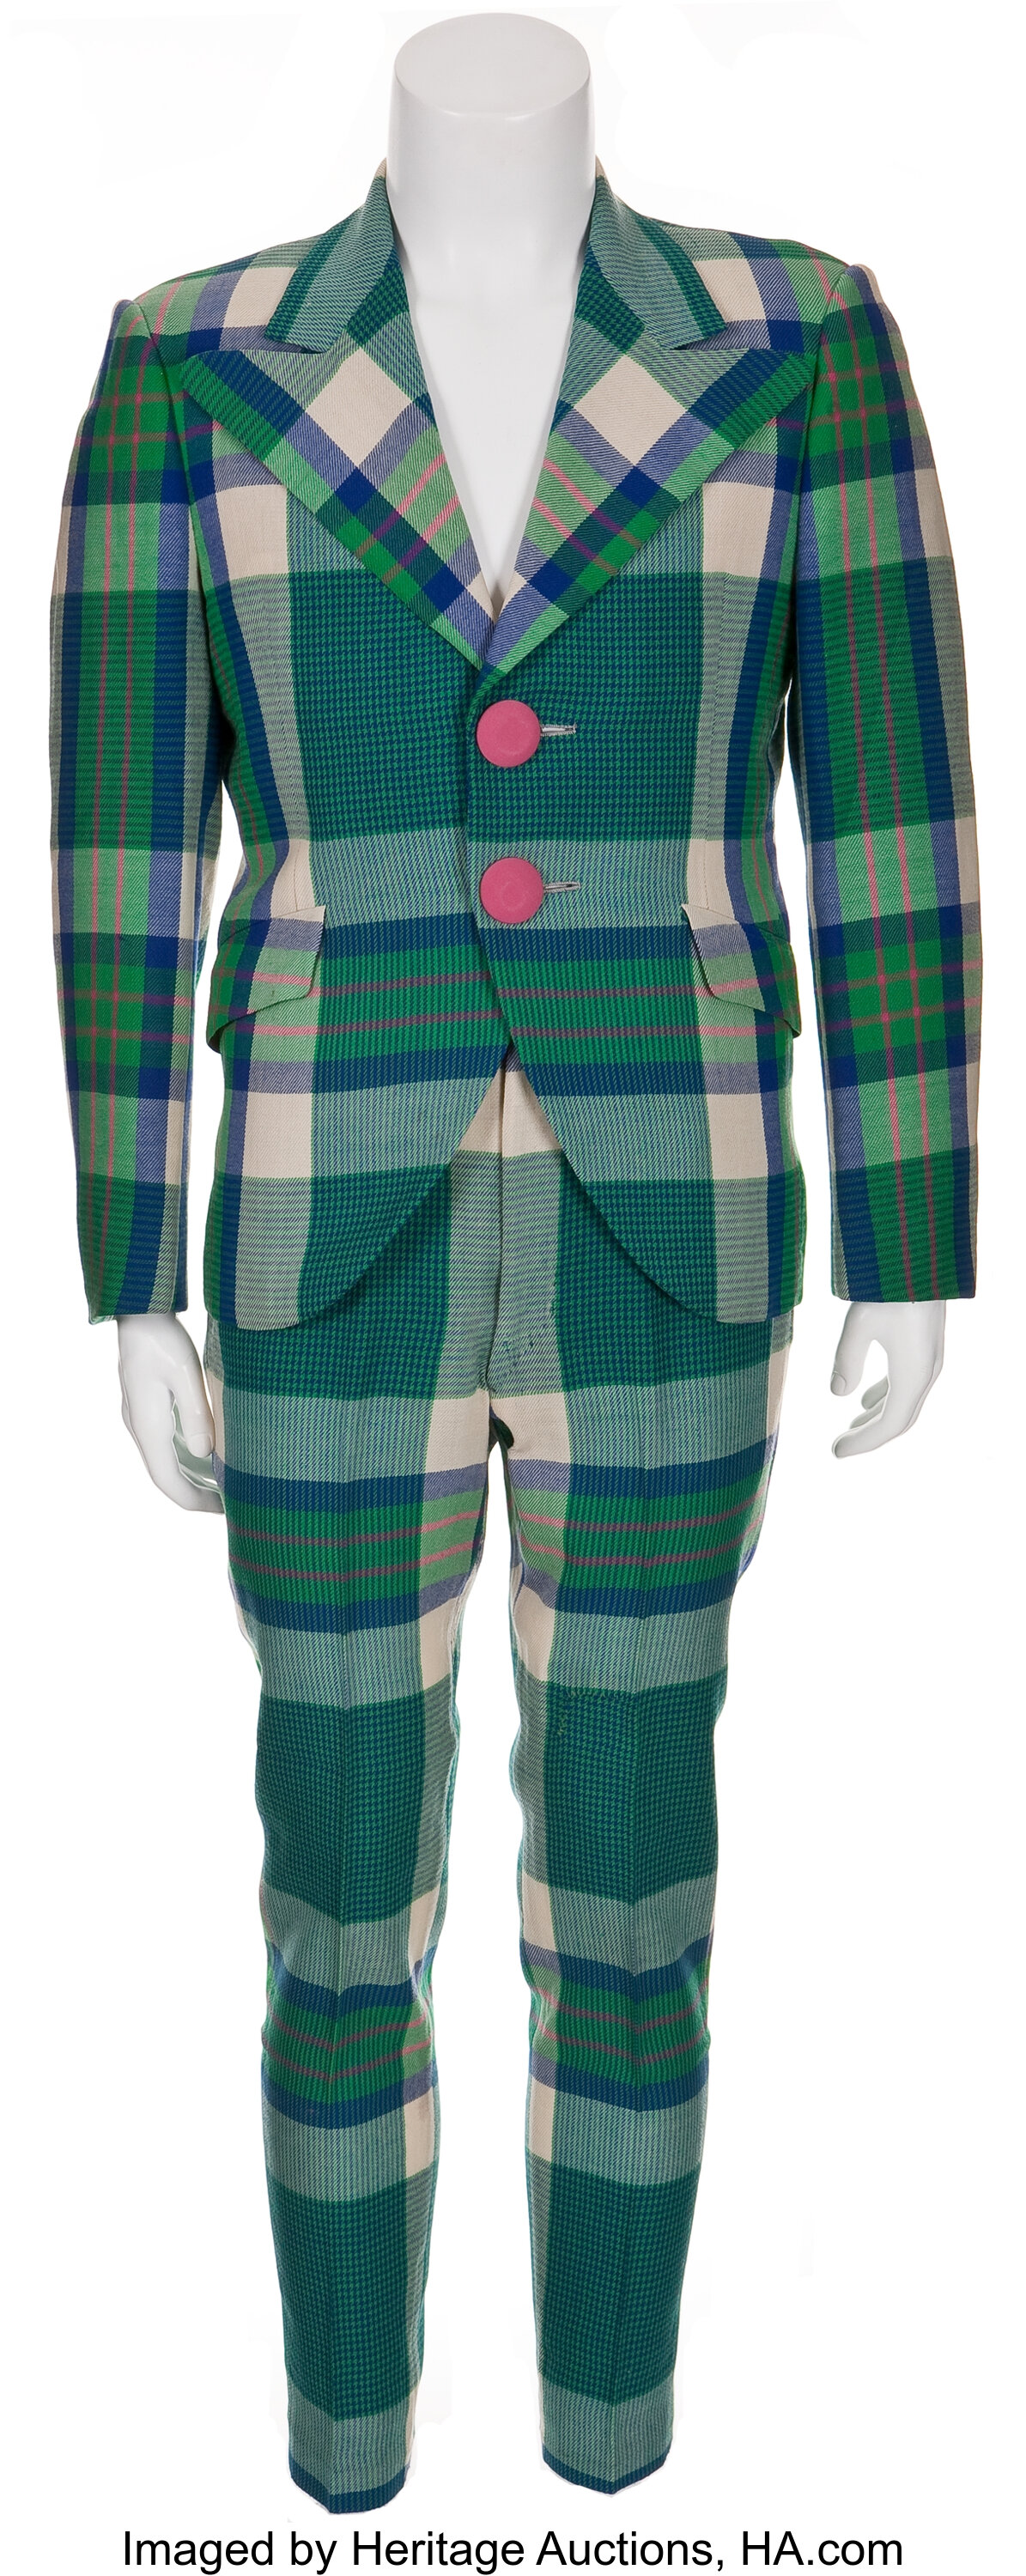 Frank Gorshin's Riddler Costume from the First Episode of Batman | Lot  #46616 | Heritage Auctions